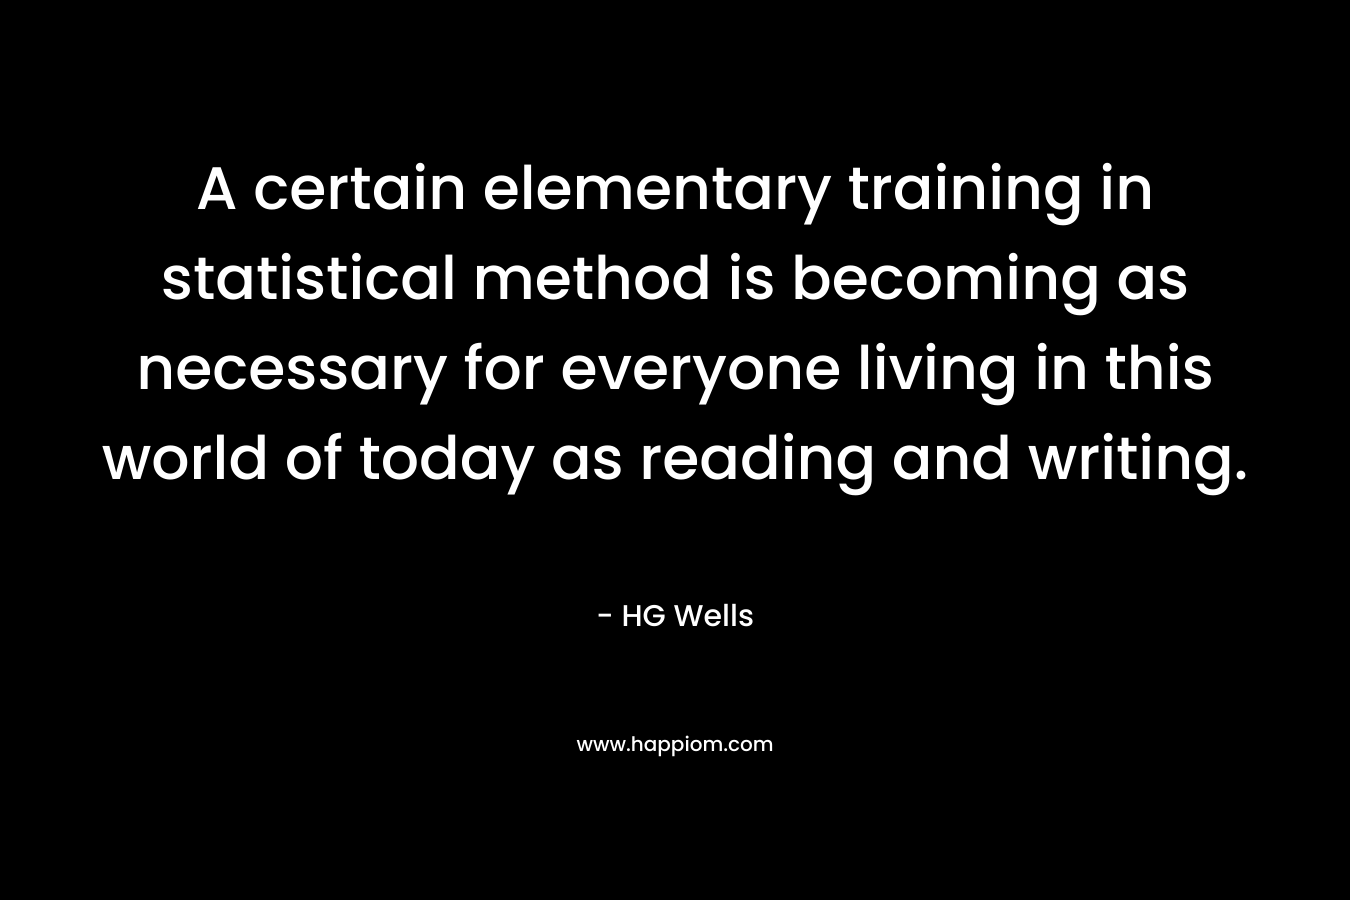 A certain elementary training in statistical method is becoming as necessary for everyone living in this world of today as reading and writing.